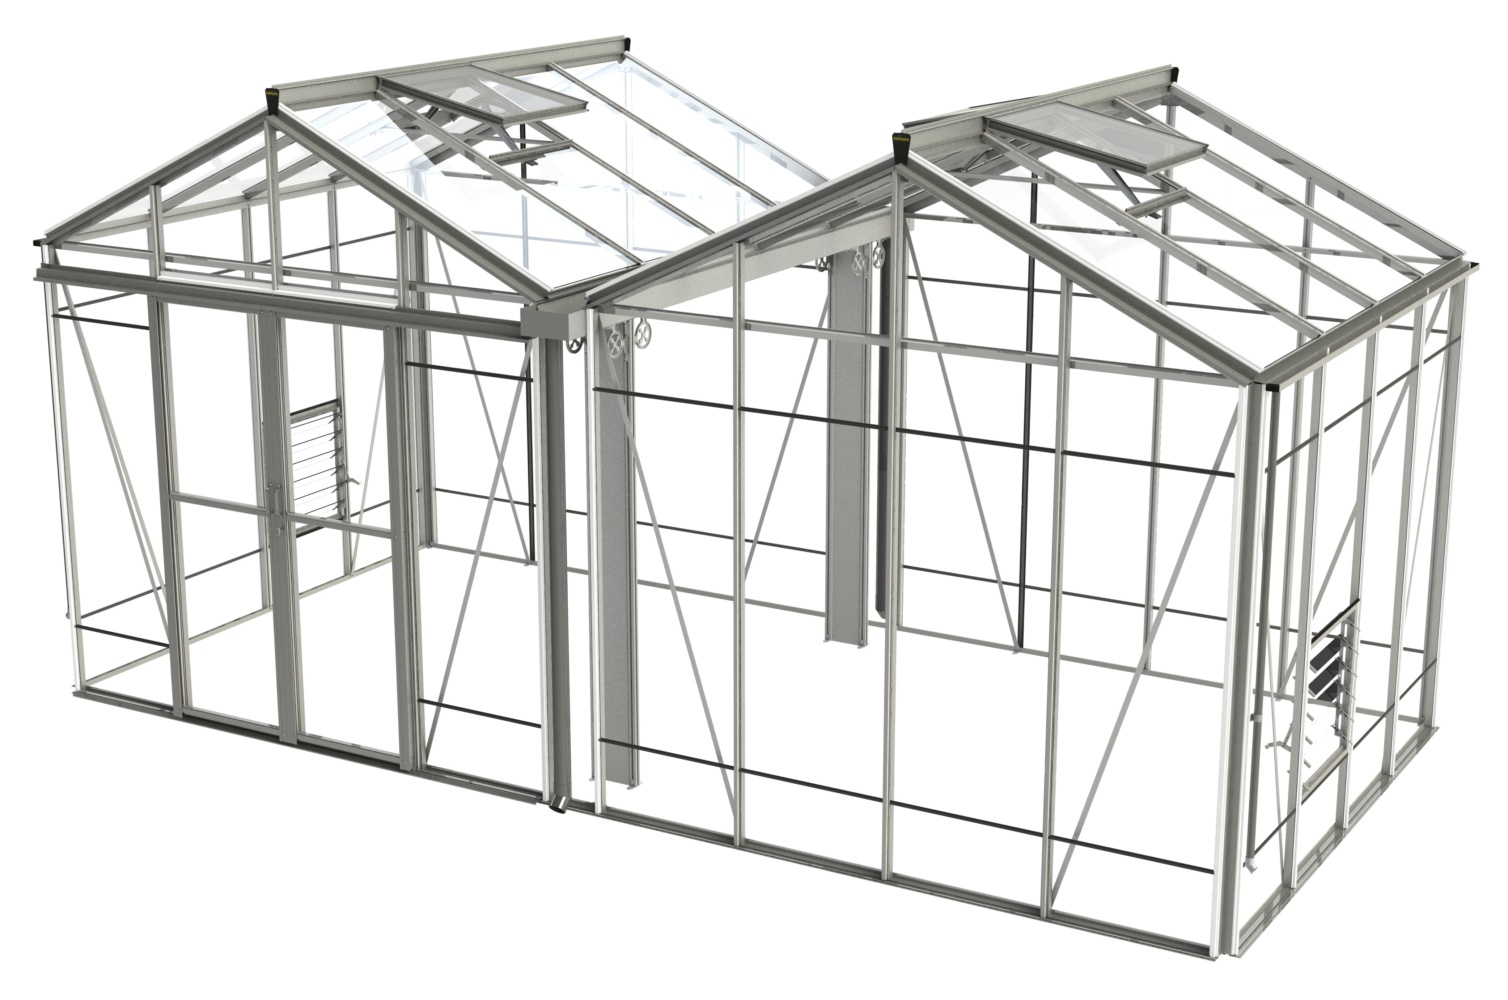 Royale Reach Double greenhouse 17 x 8 by Robinsons